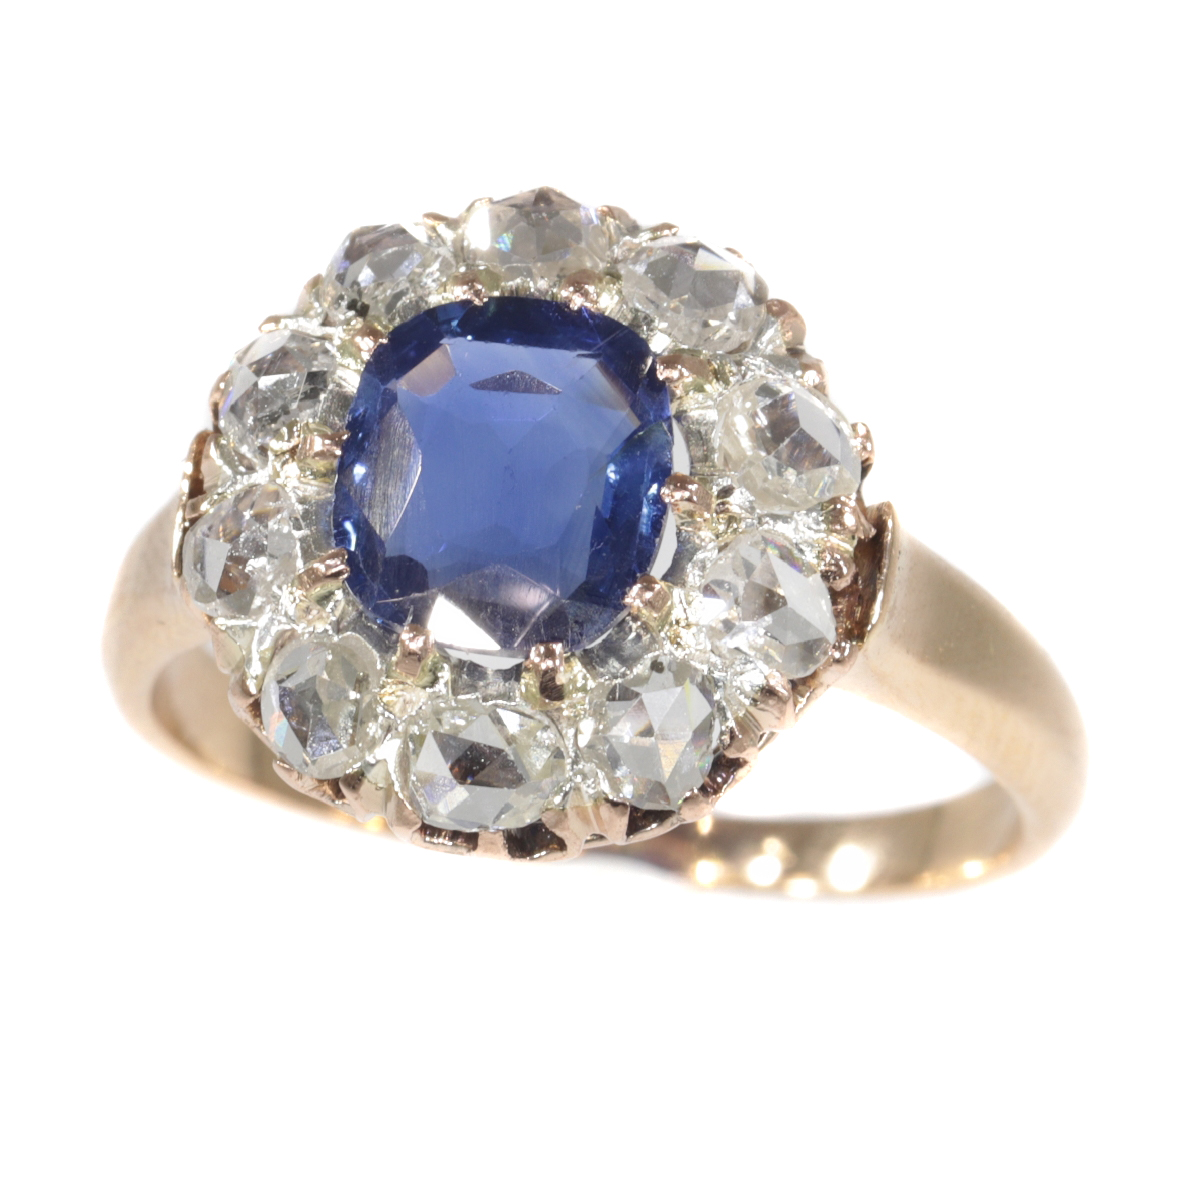 Victorian antique engagement ring with natural sapphire and ten rose cut diamonds